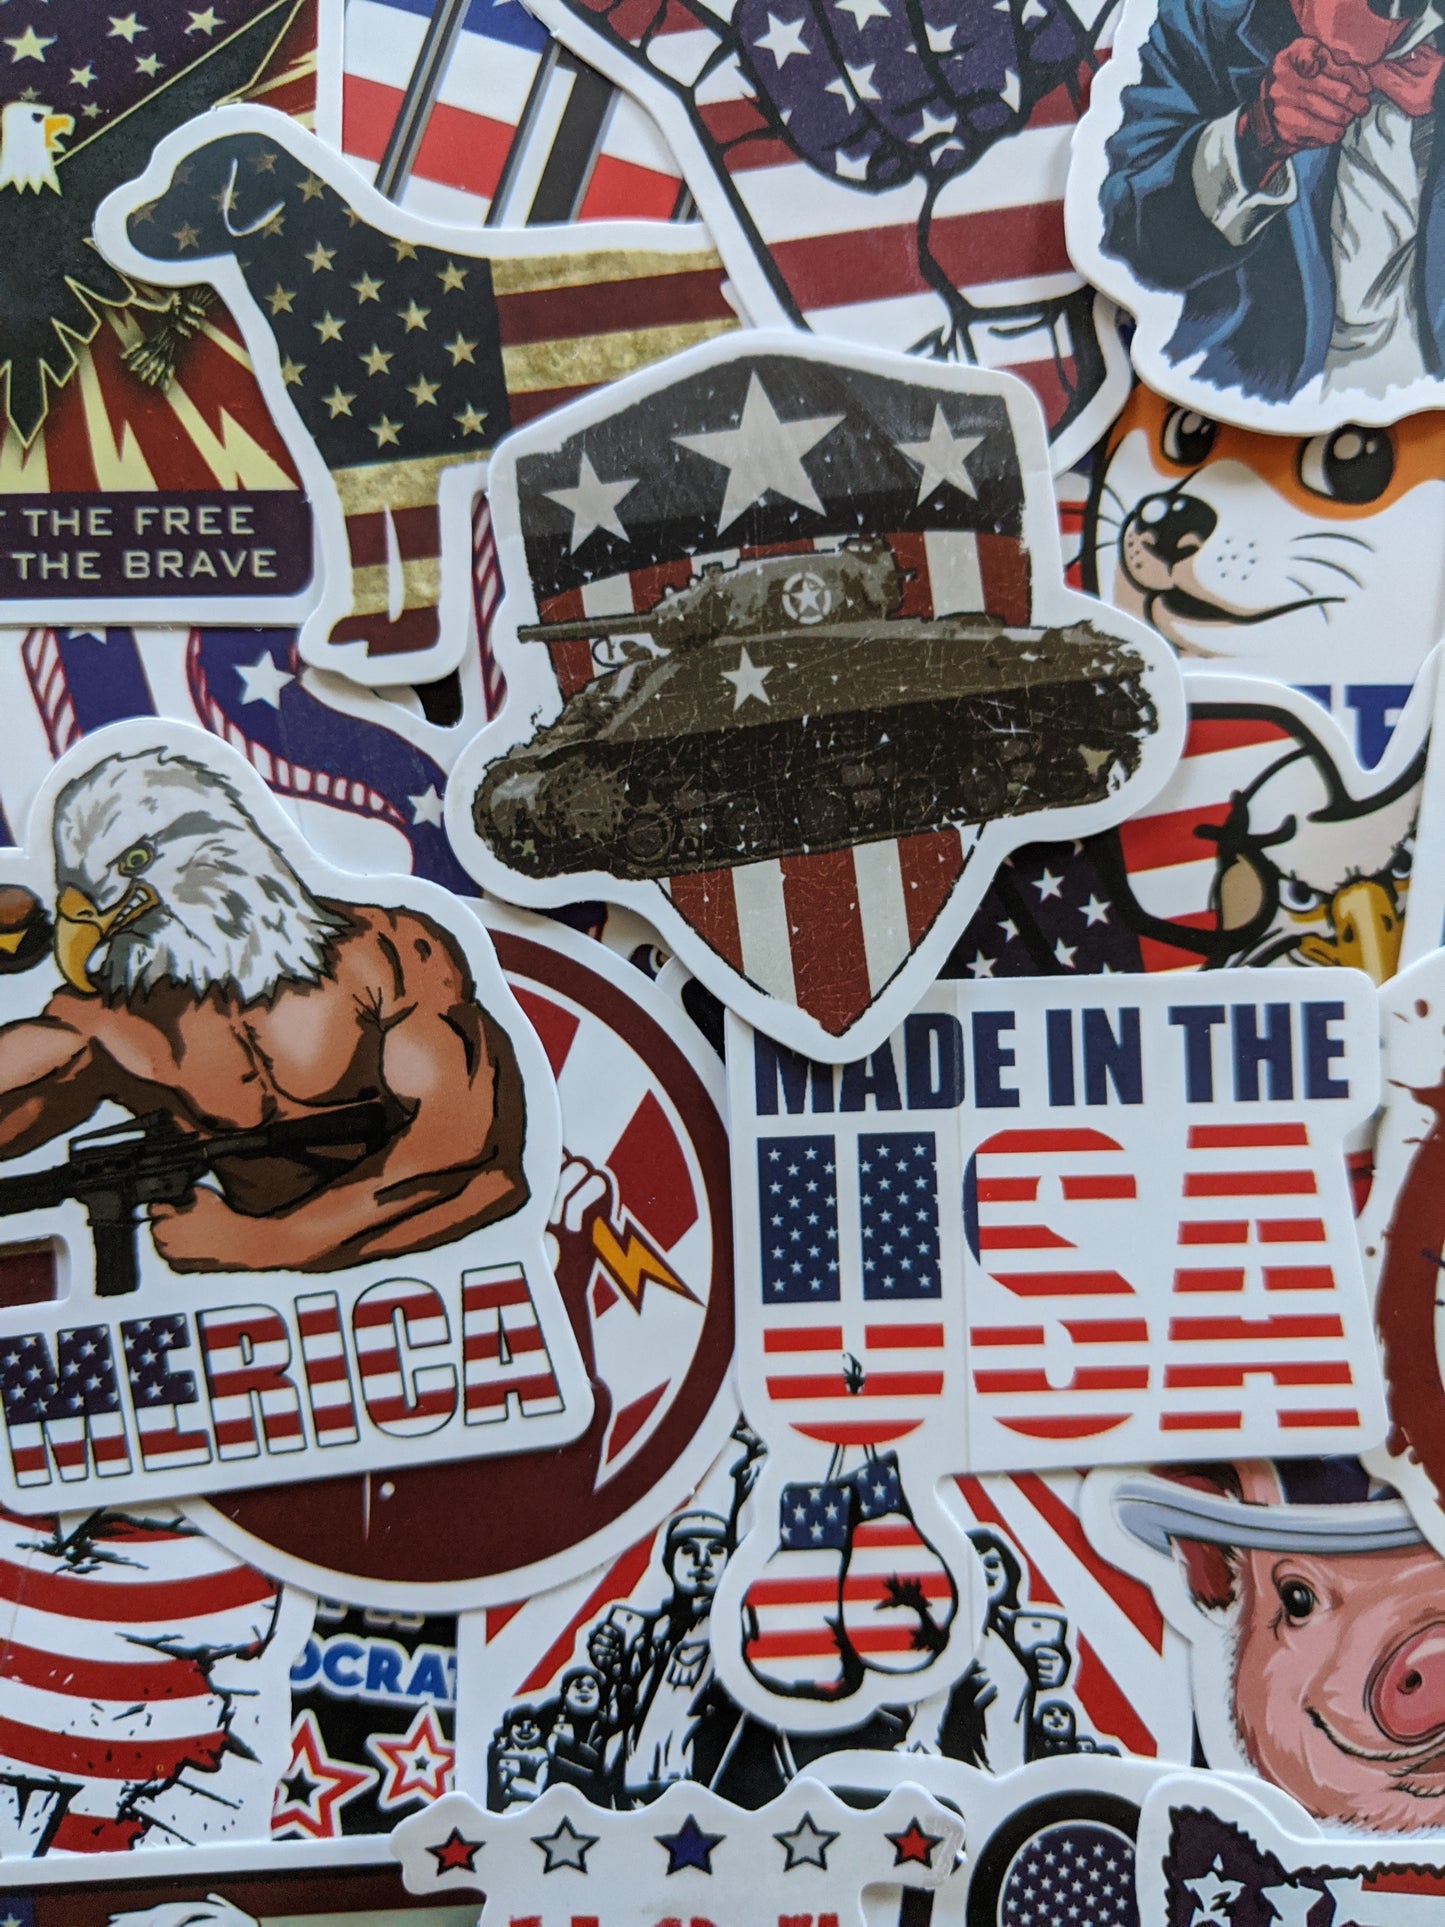 American Patriot Themed Stickers